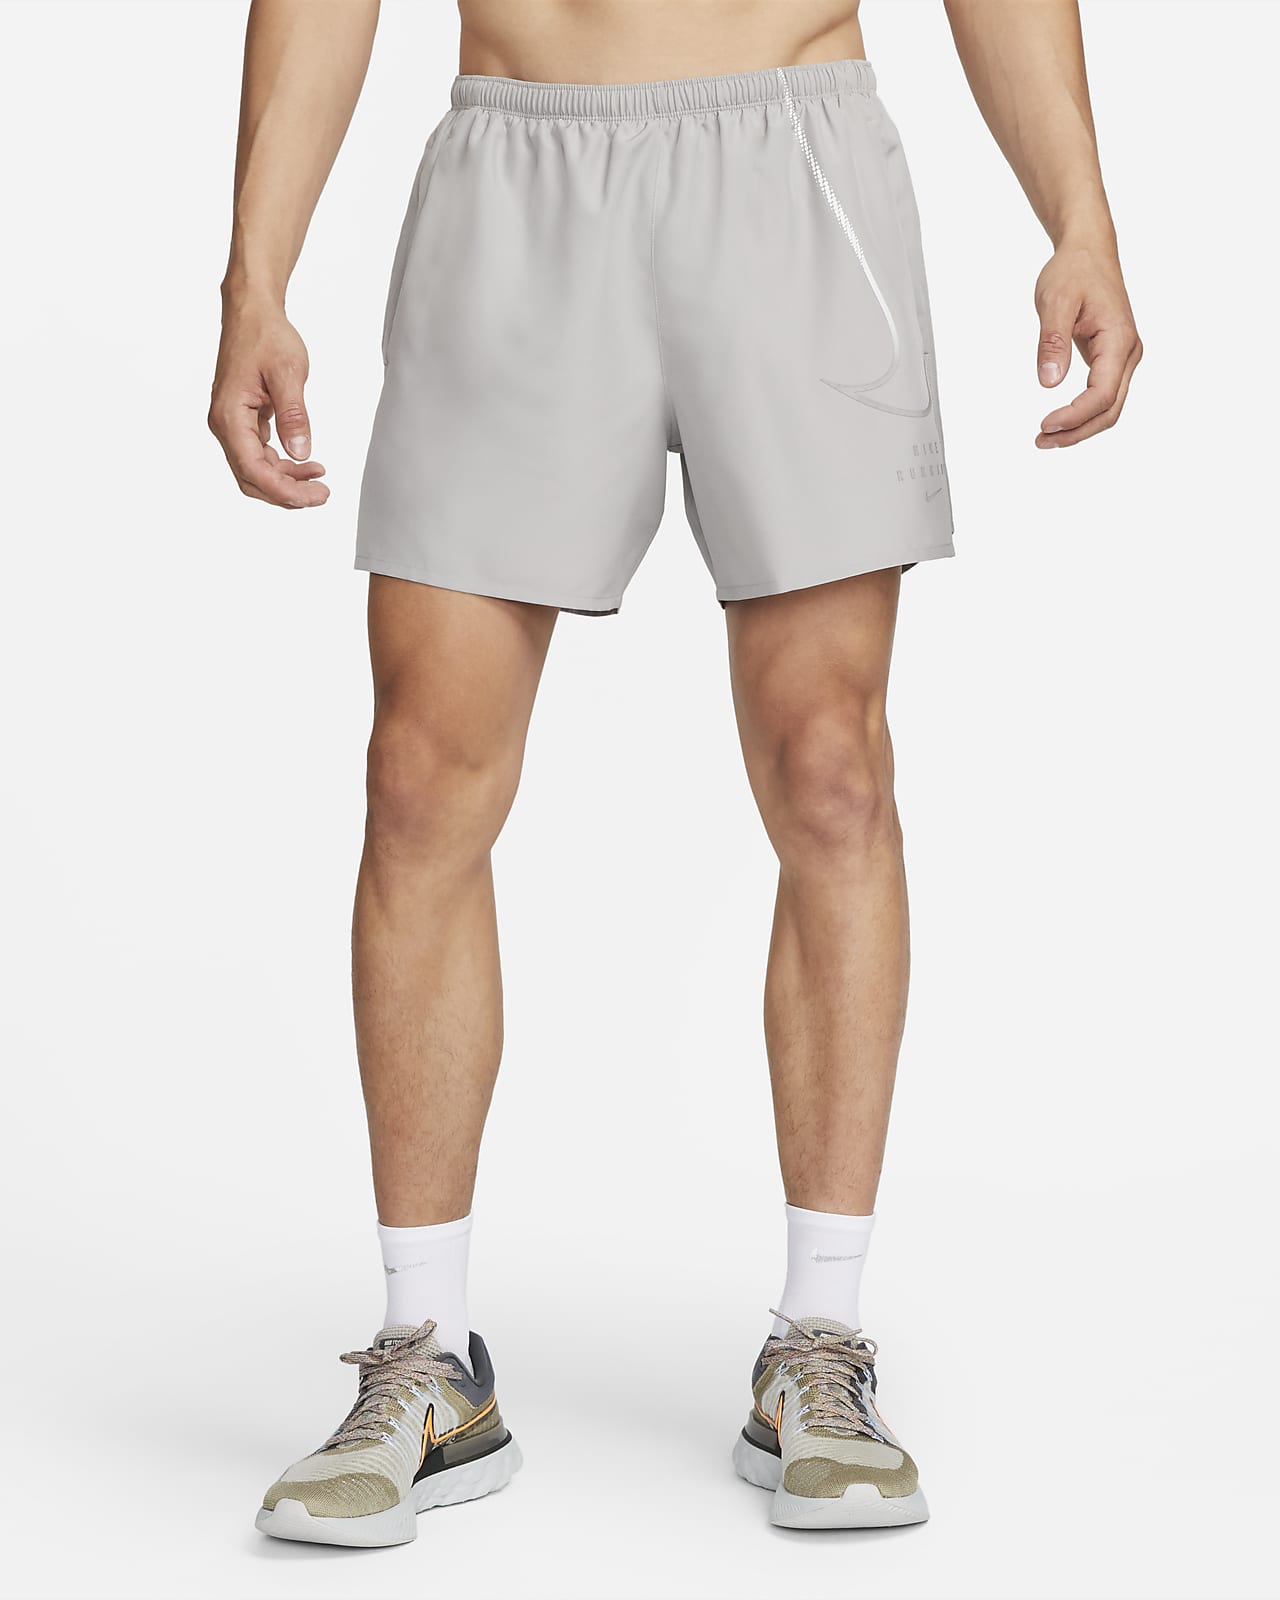 Nike Dri-FIT Run Division Challenger Men's 13cm (approx.) Brief-Lined Running Shorts